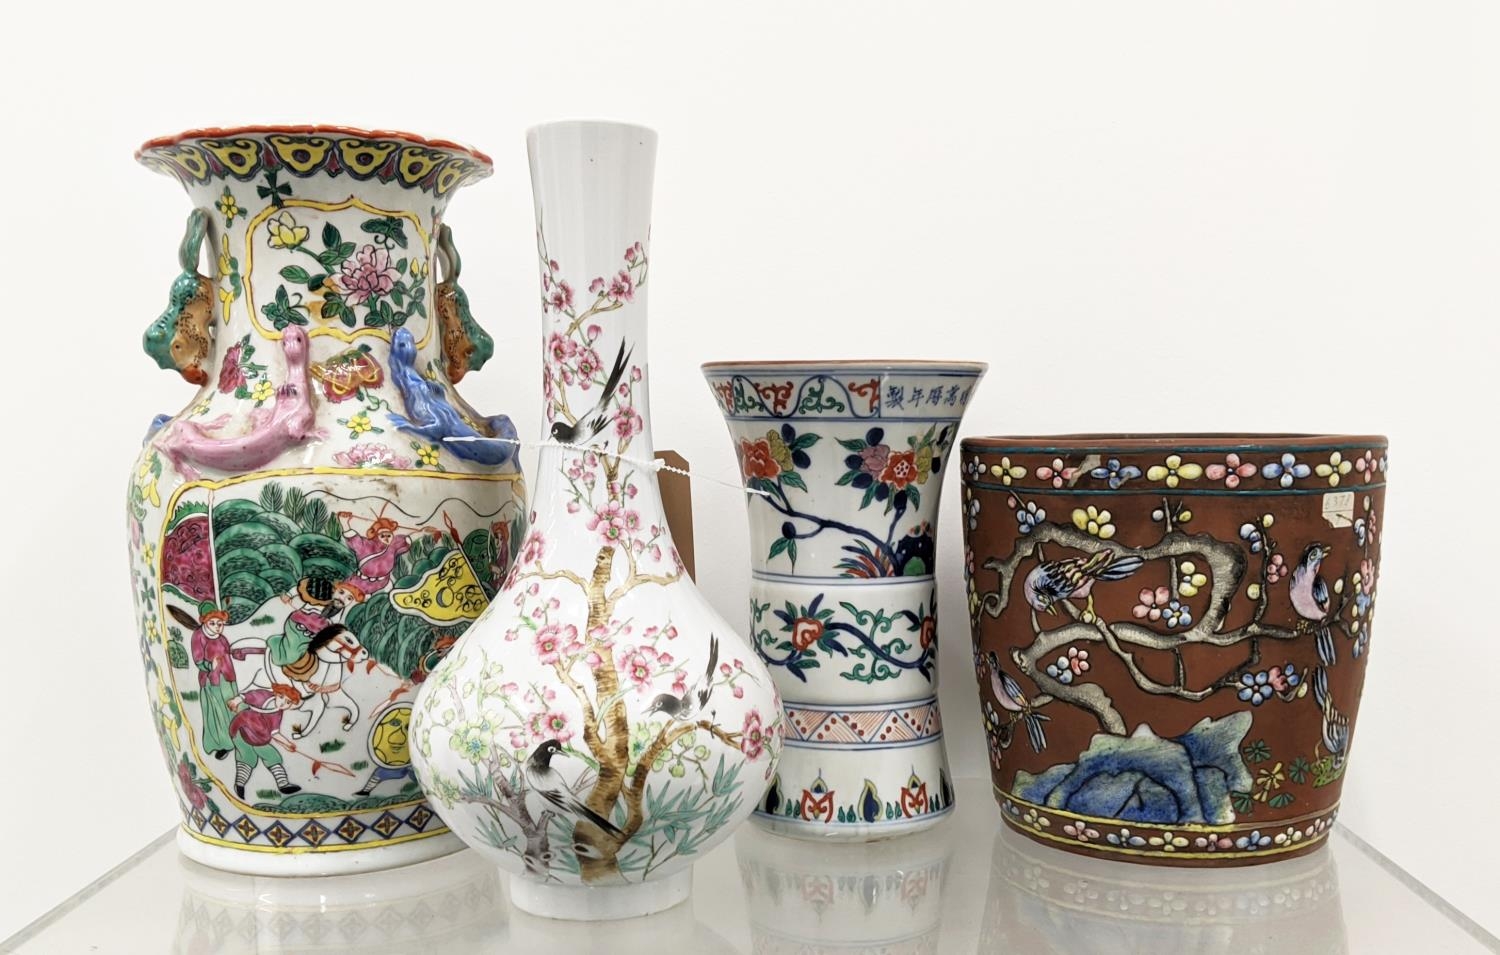 CHINESE PORCELAIN VASES, three including a bottle vase and a GU and I-Hing pottery jardiniere. (4)